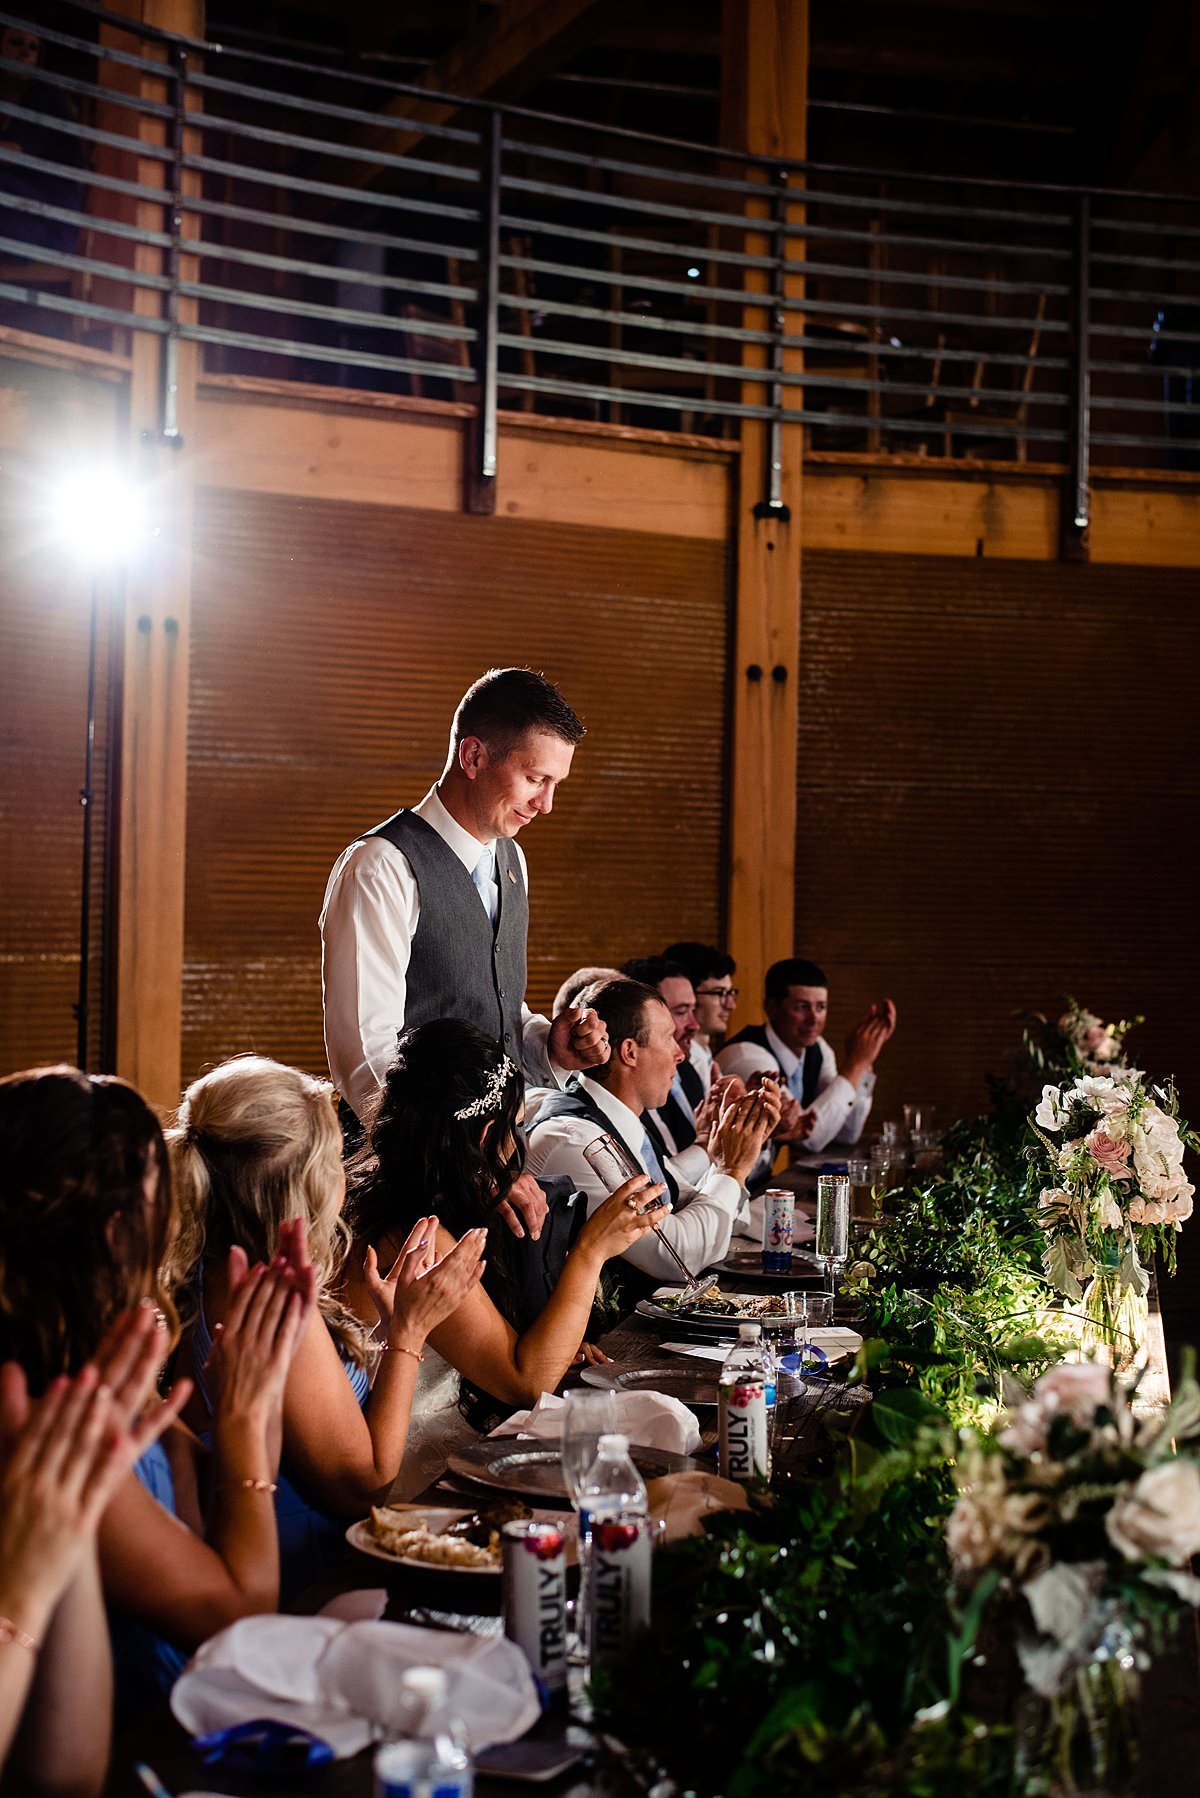 Groom standing at the head table and giving a welcome speech to his guests